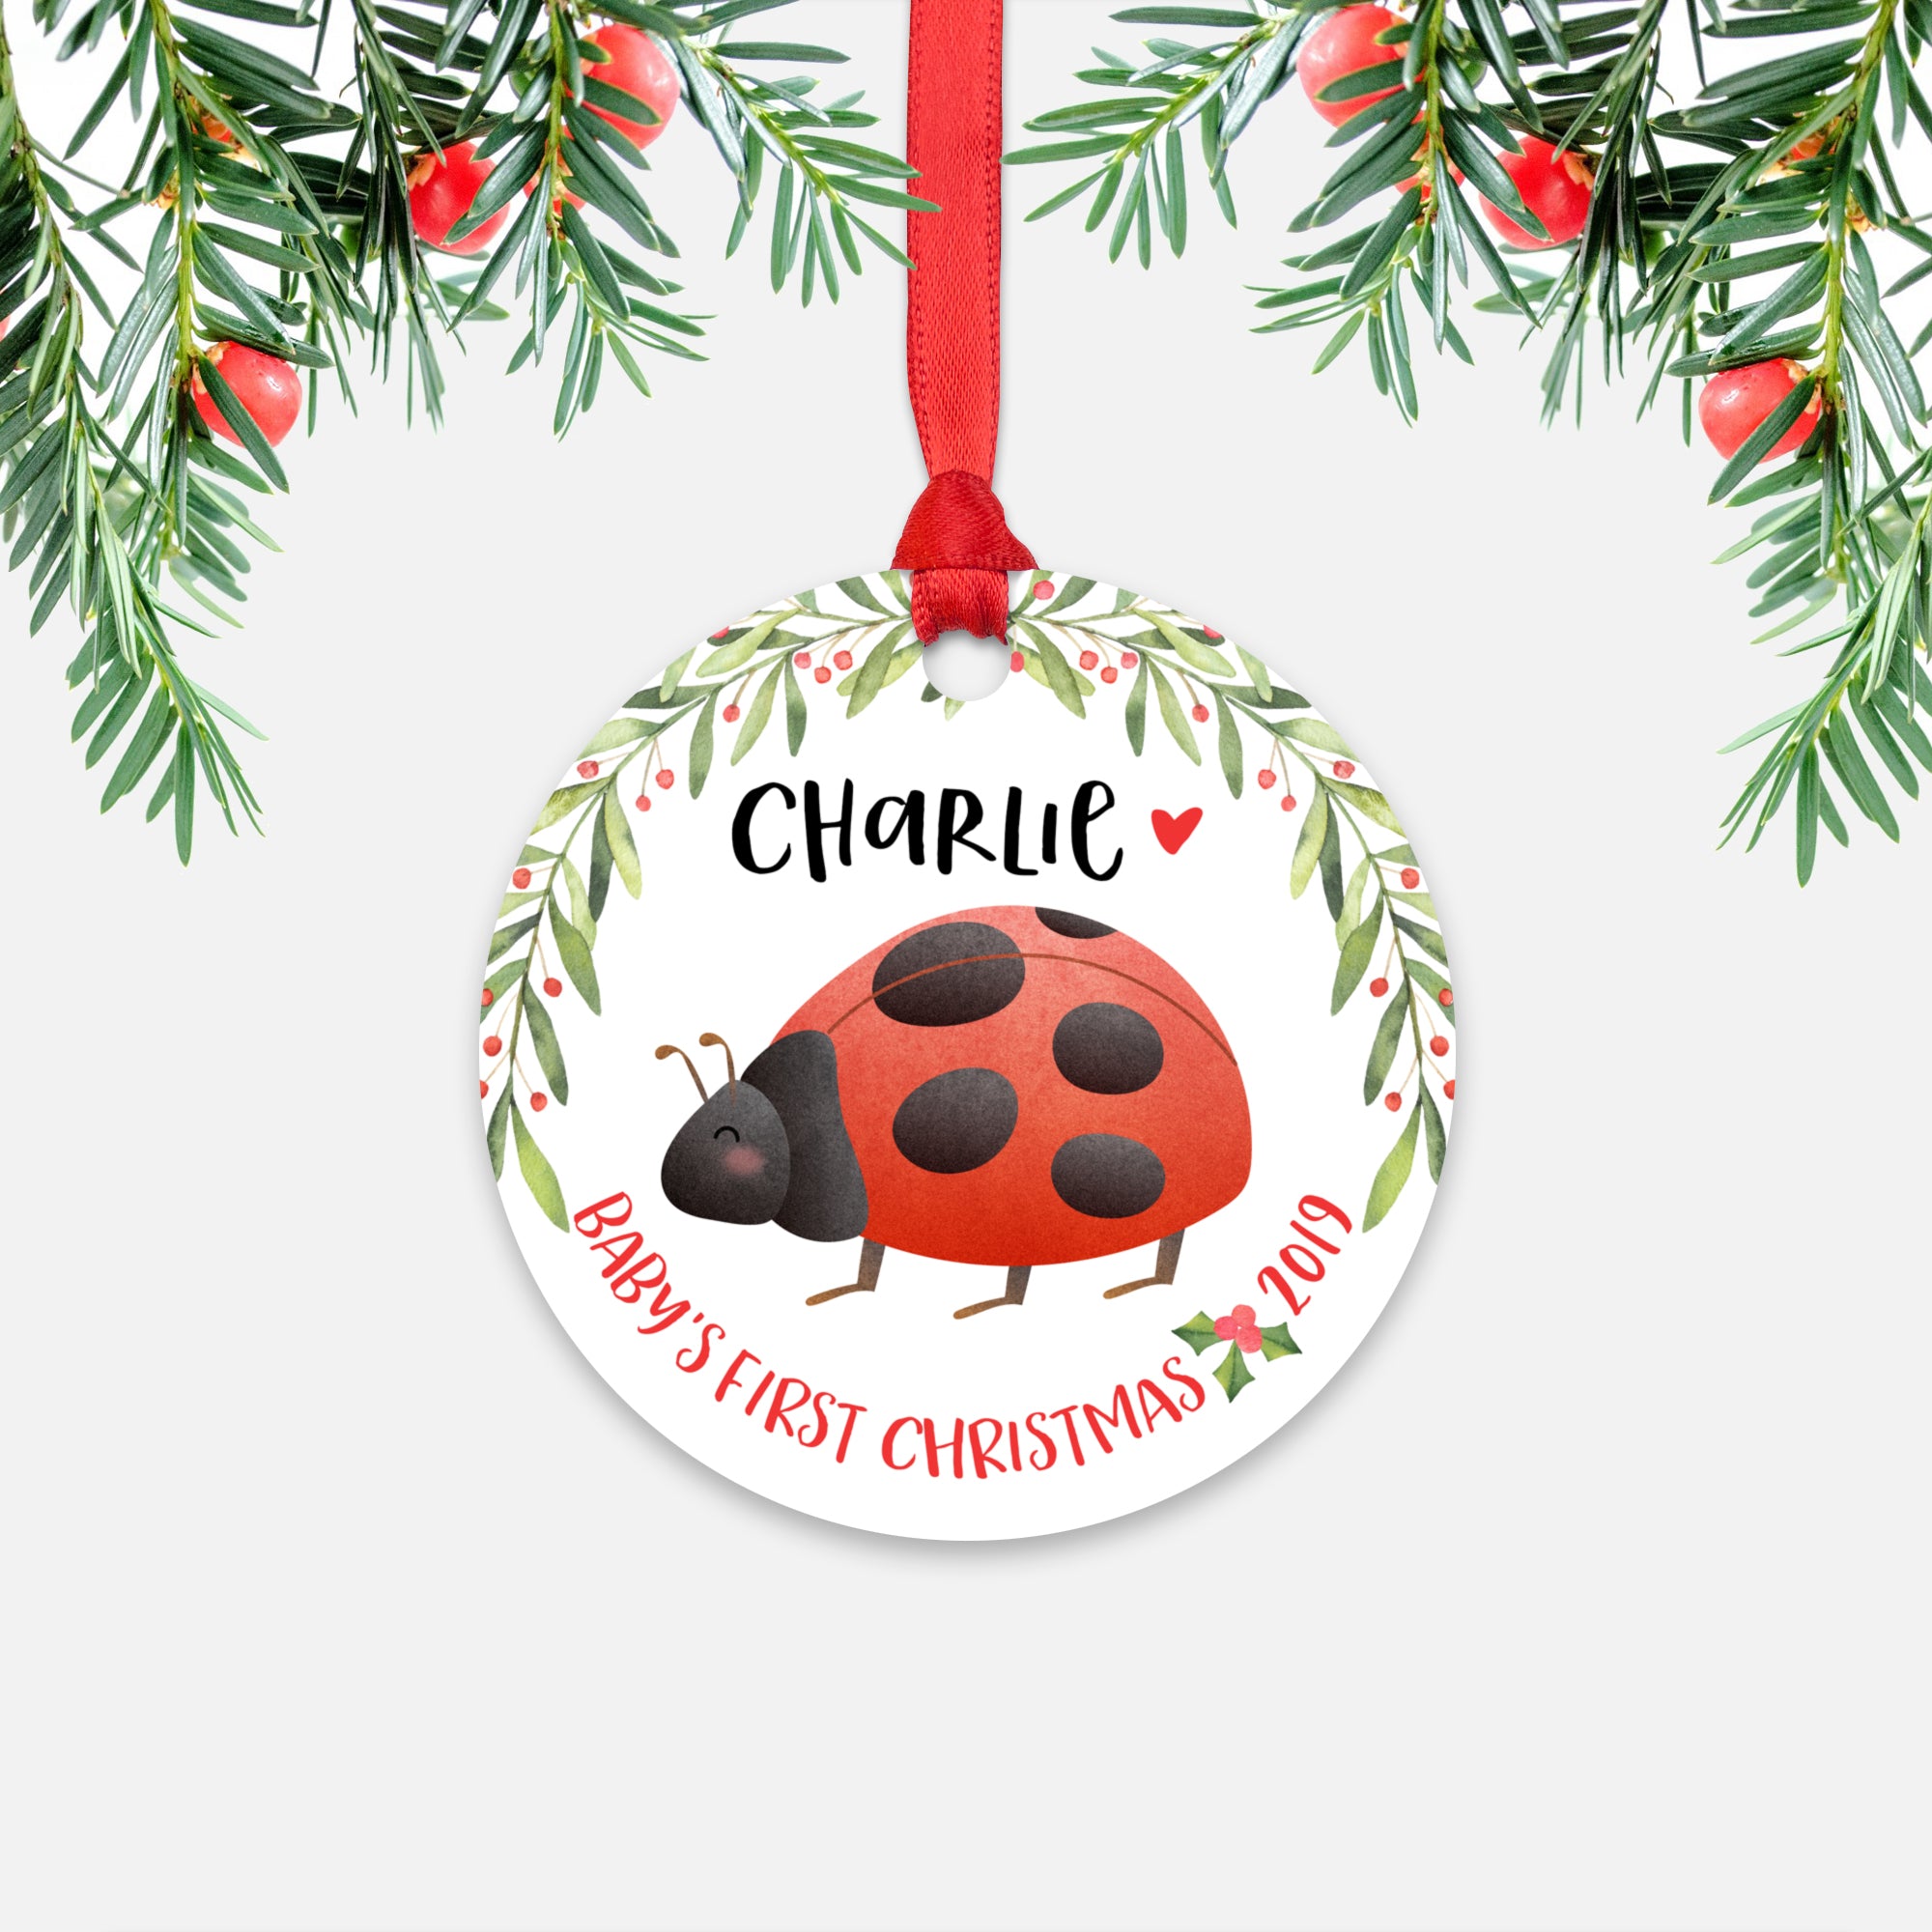 Ladybug Personalized Baby’s First Christmas Ornament for Baby Boy or Baby Girl - Cute Animal Baby 1st Holidays Decoration - Custom Christmas Gift Idea for New Parents - Round Aluminum - by Happy Cat Prints